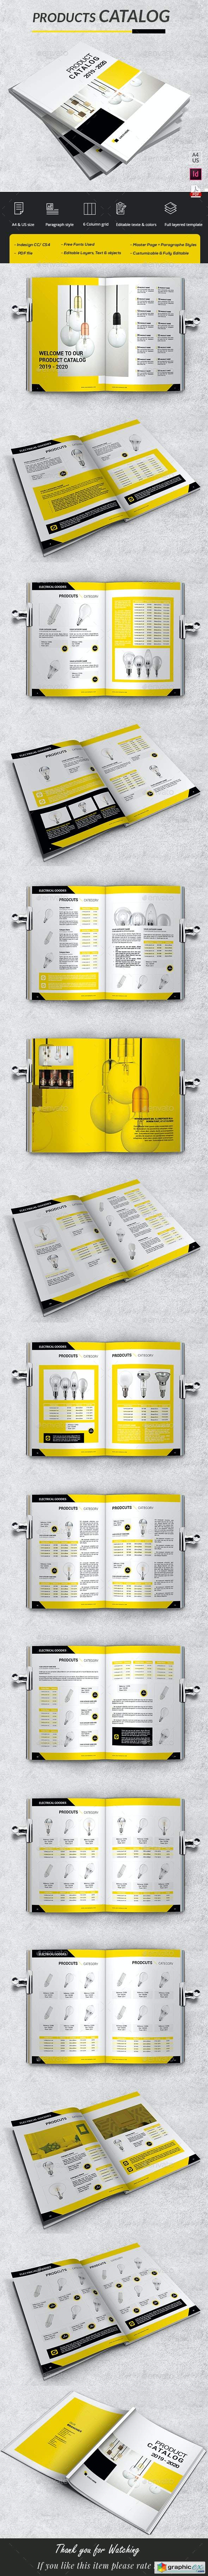 Industrial Catalog Products A4 